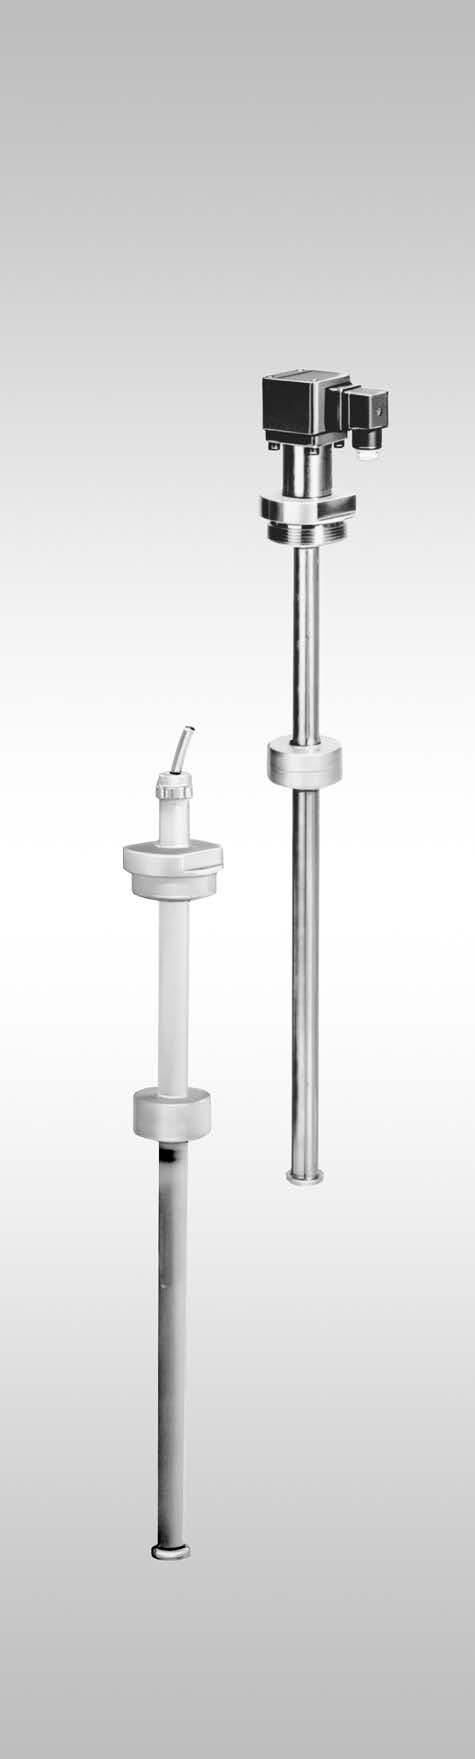 Level Transmitter Construction The GEMÜ level transmitter has an immersion tube with reed contacts and a chain of resistors which are triggered by a float with